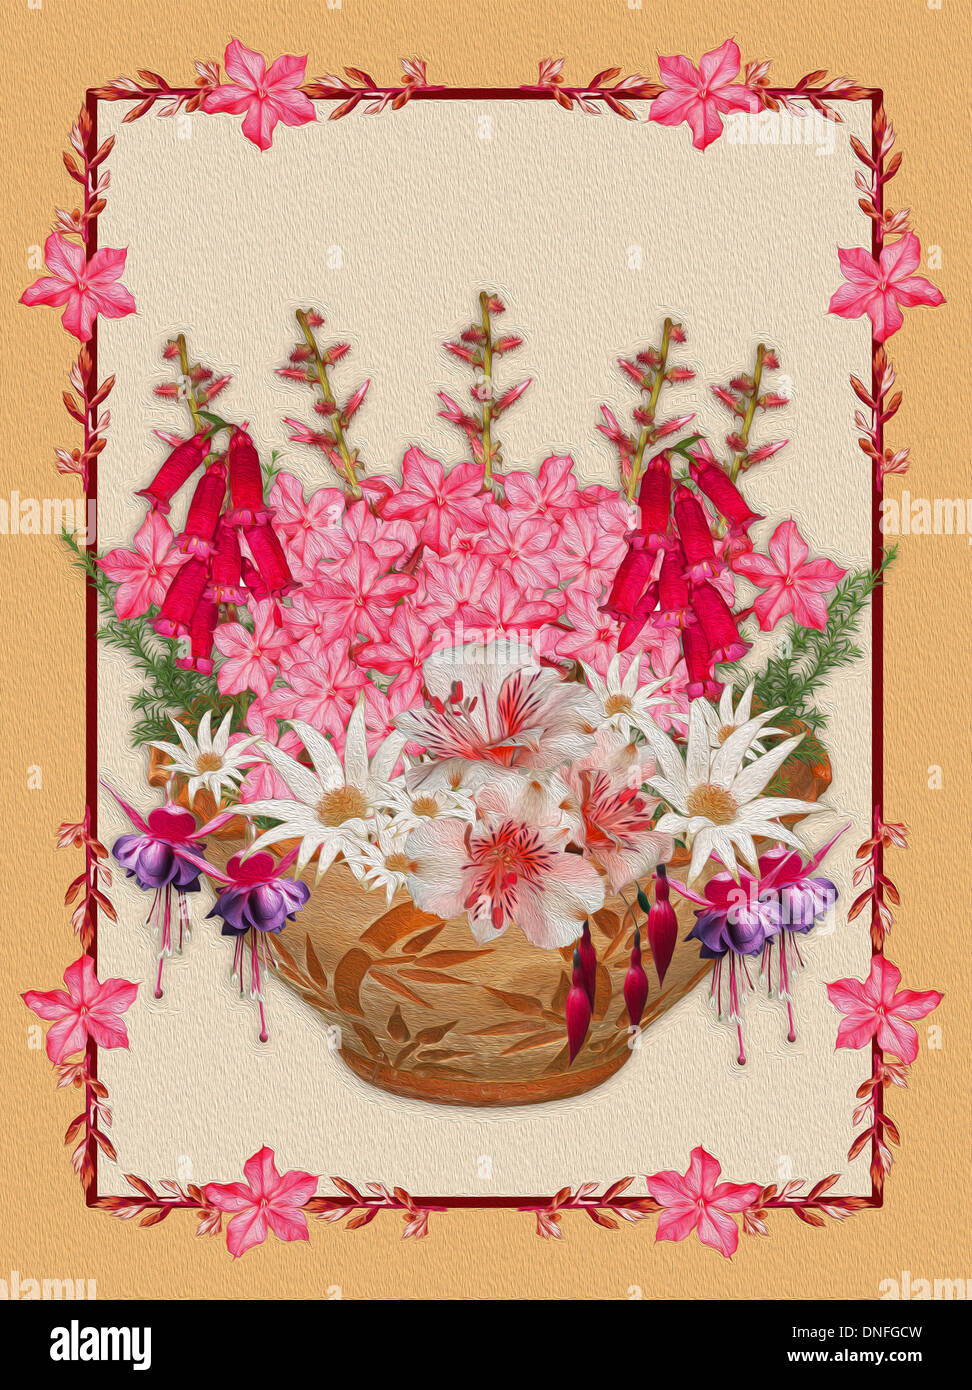 Unique floral art with pink plumbago flowers, white daisies, purple fuchsias, and alstroemerias in decorative terracotta pot, pale apricot background Stock Photo